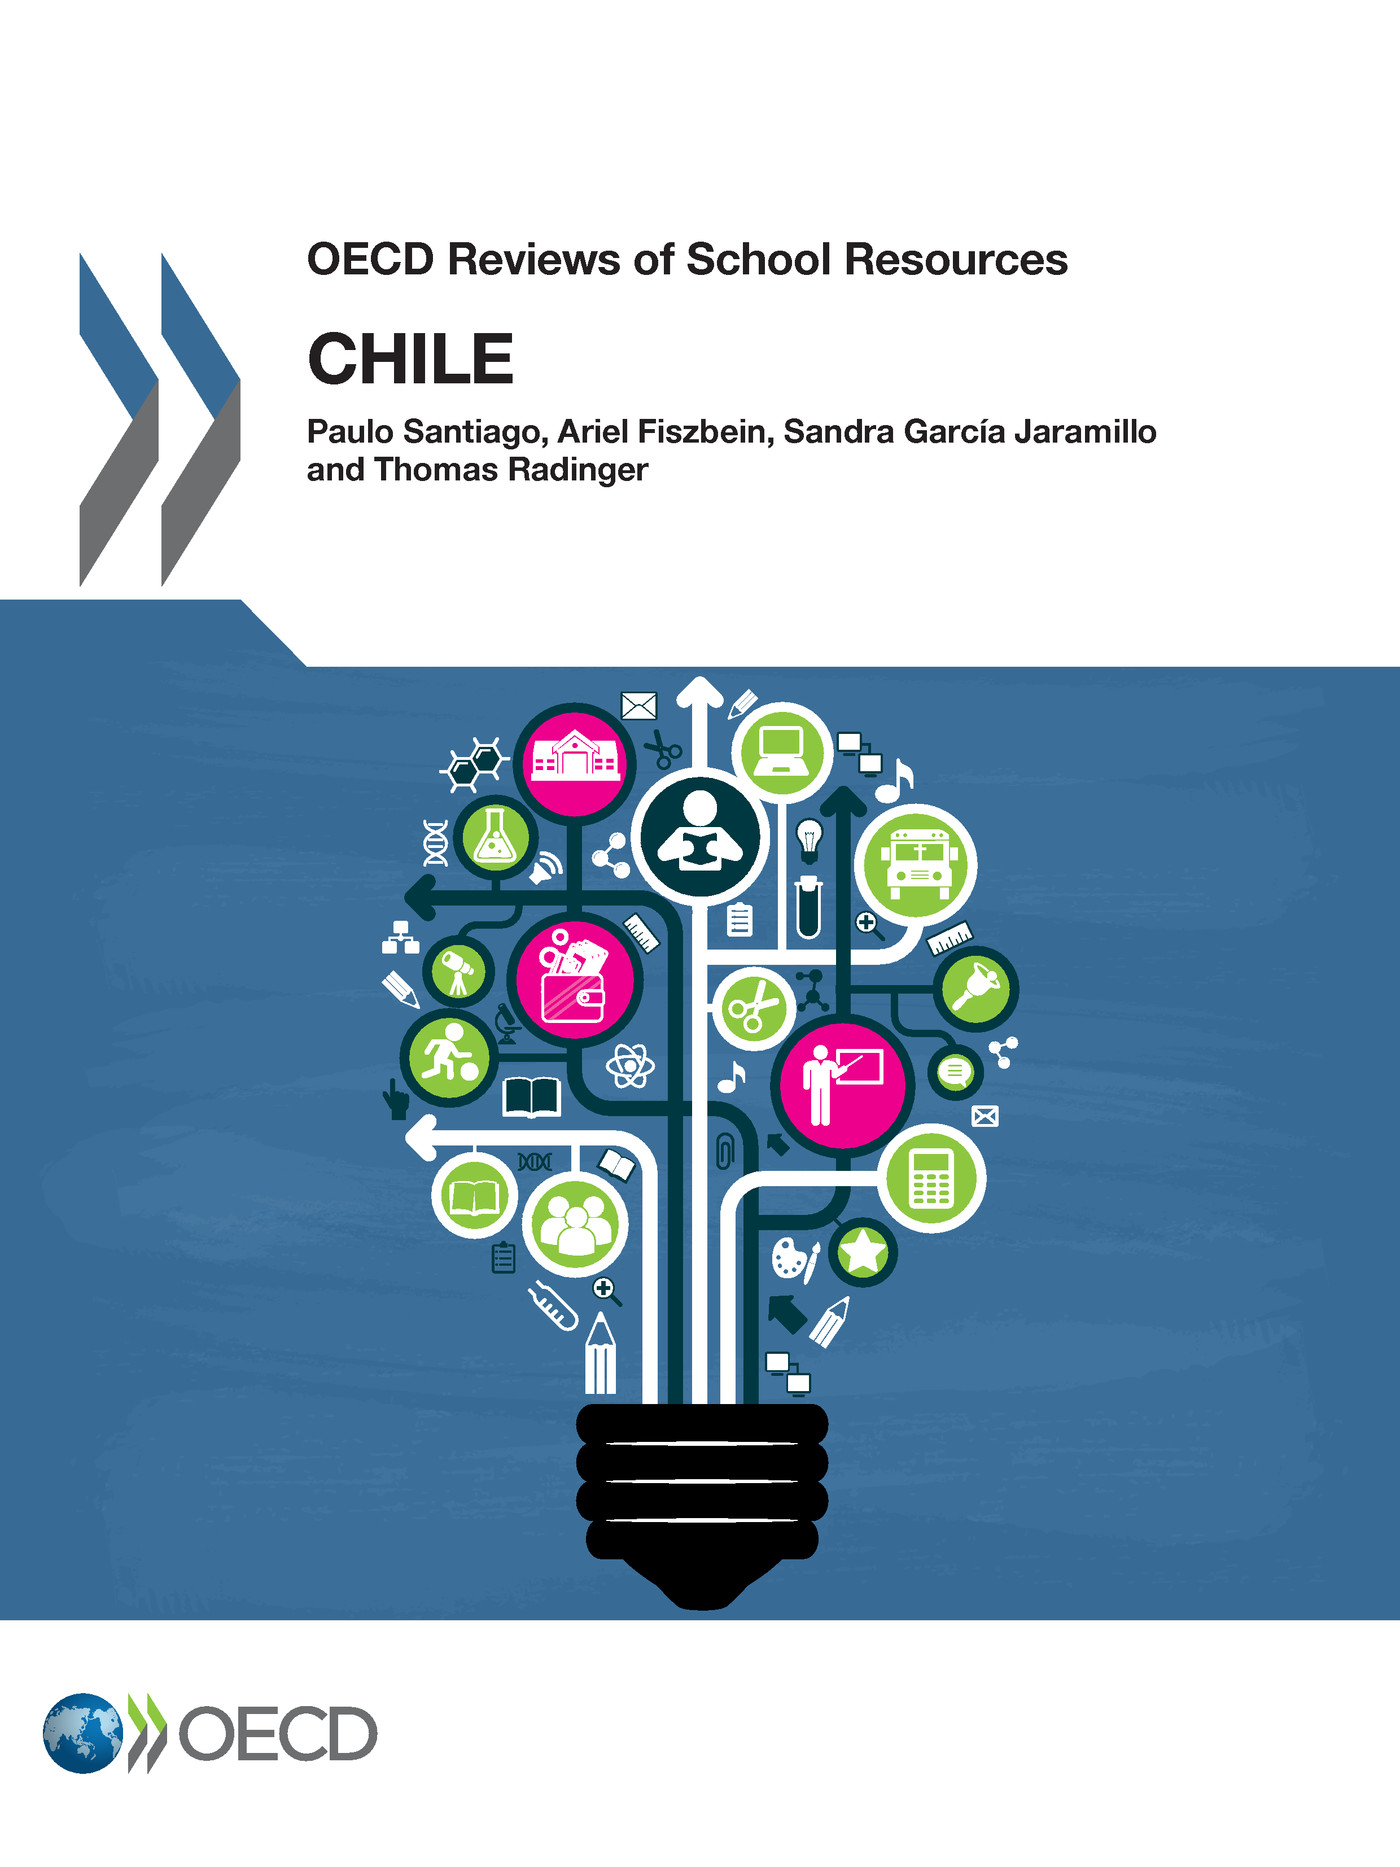 OECD Reviews of School Resources: Chile 2017 De  Collectif - OCDE / OECD